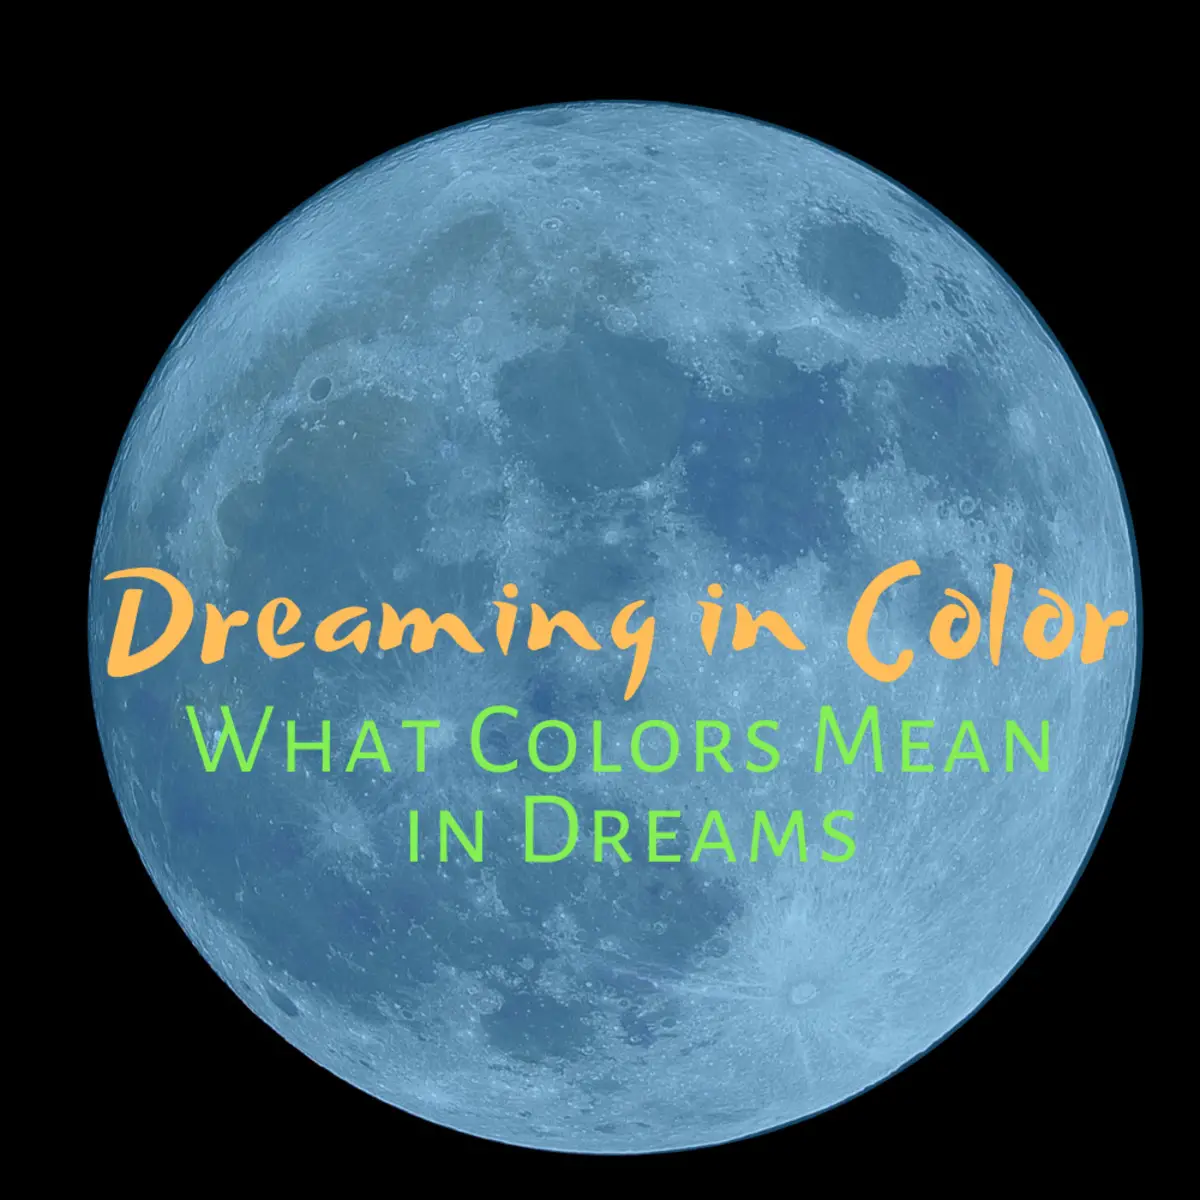 What Is The Meaning Of Colorful Dreams?